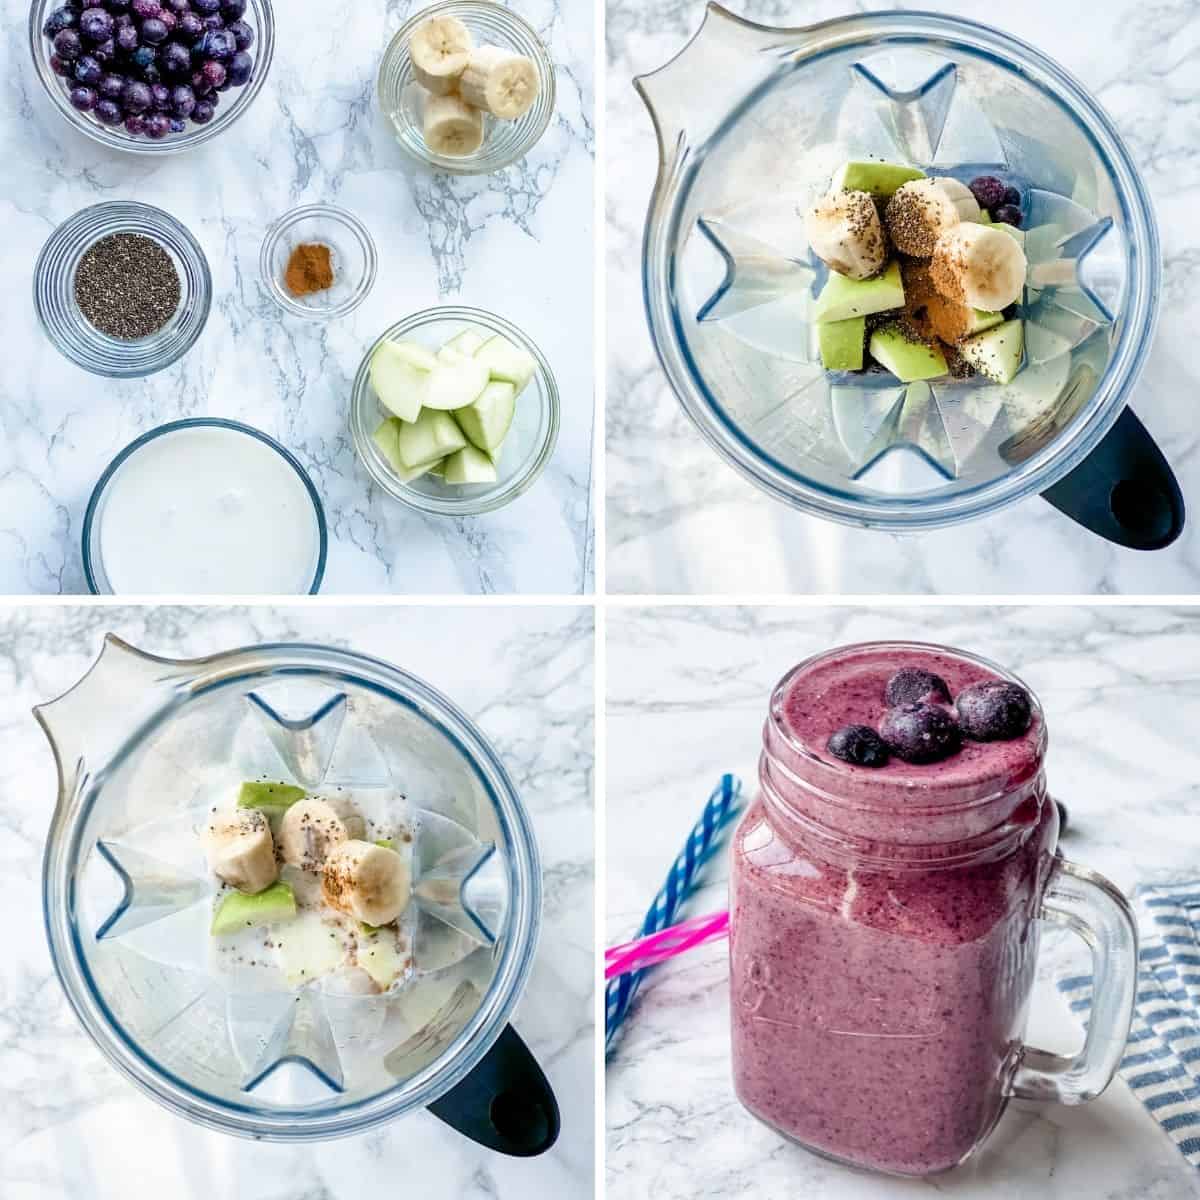 step by step collage showing how to make a blueberry smoothie.